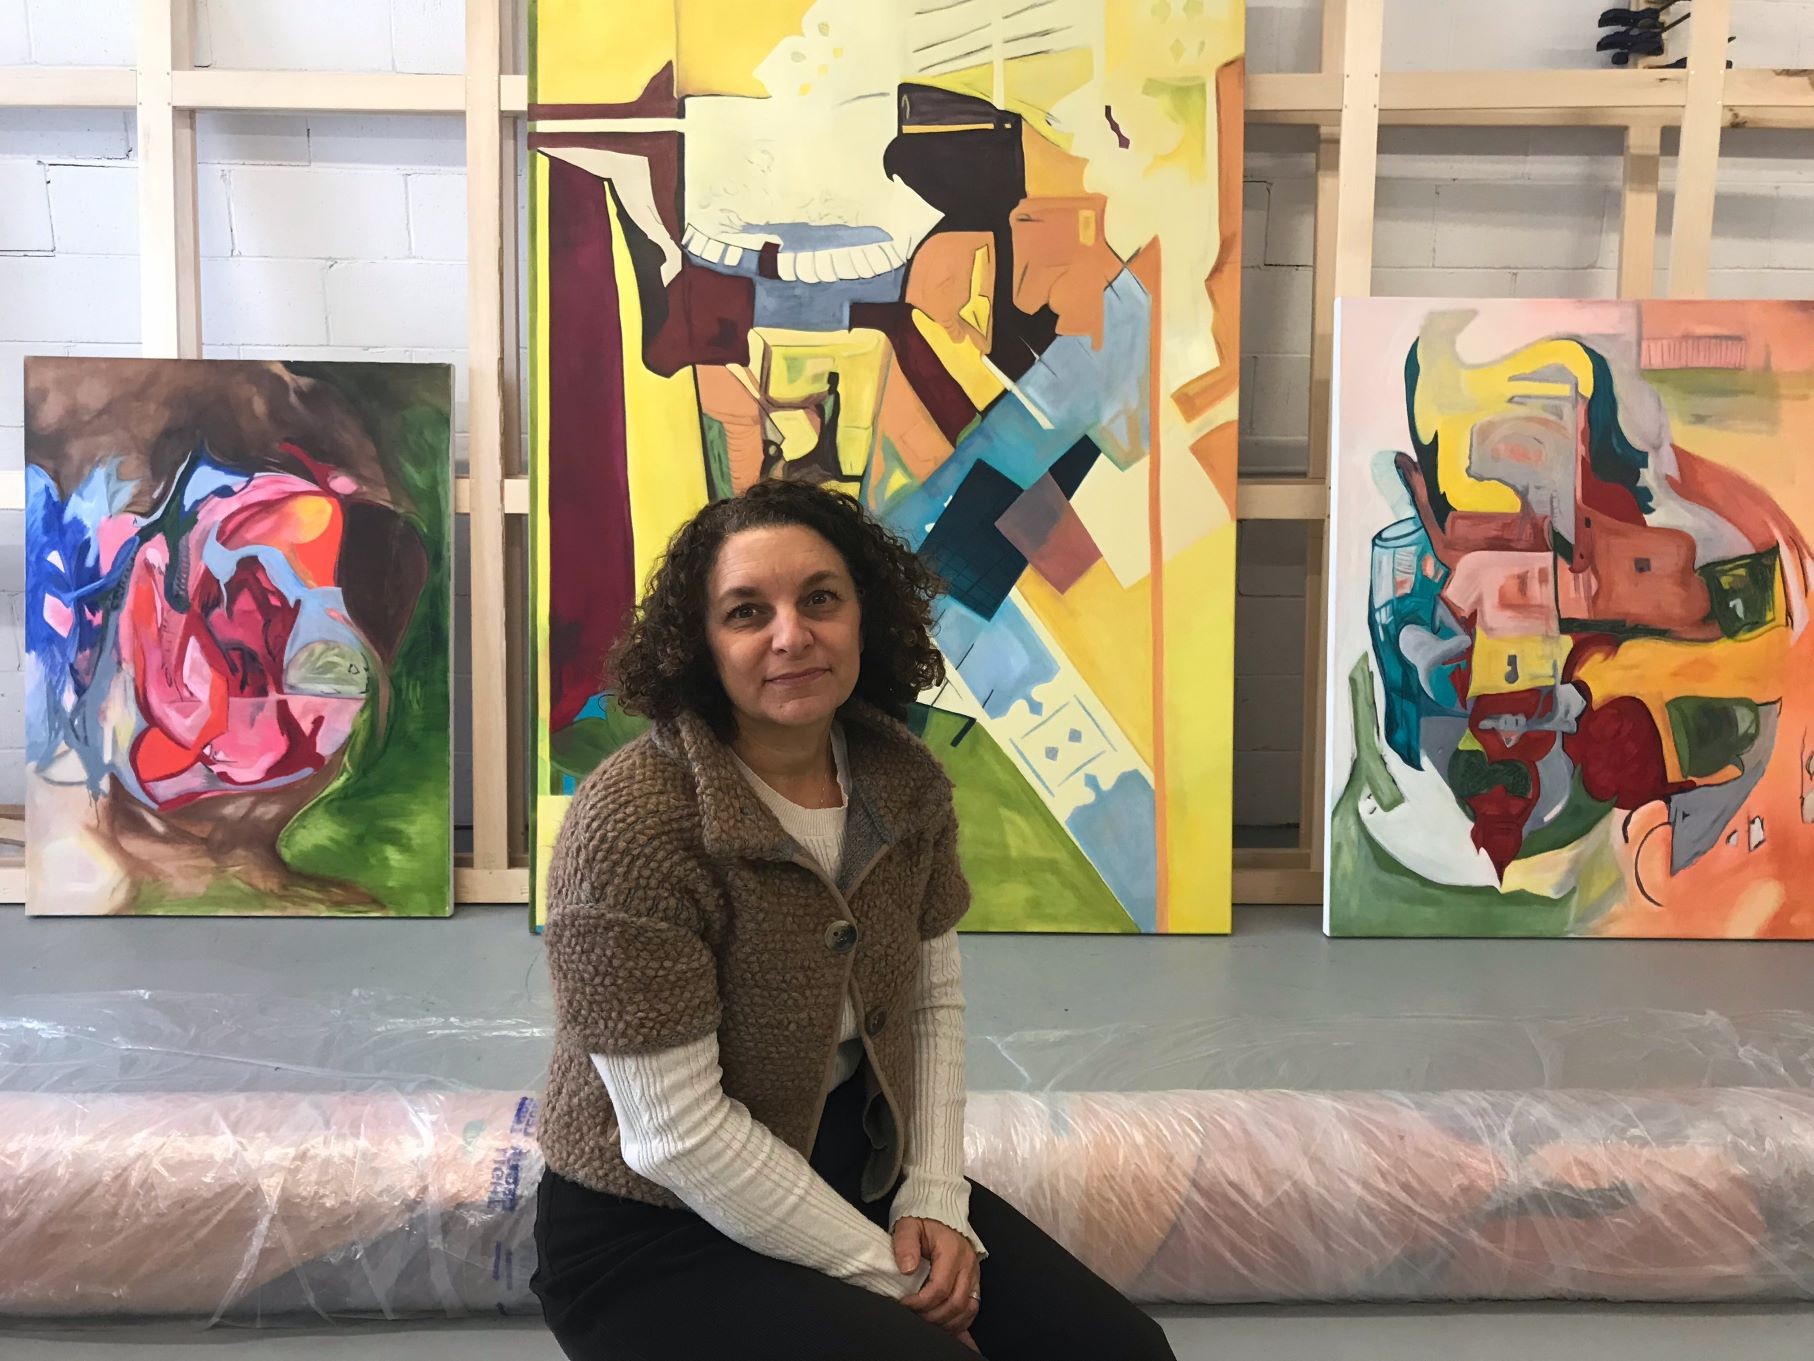 A woman sitting in front of several large, colorful abstract paintings. She has curly, dark hair that falls to her shoulders and is wearing a light brown knitted cardigan over a white shirt. She is smiling slightly at the camera. Behind her, there are multiple canvases propped up against a white wall in an art studio setting.